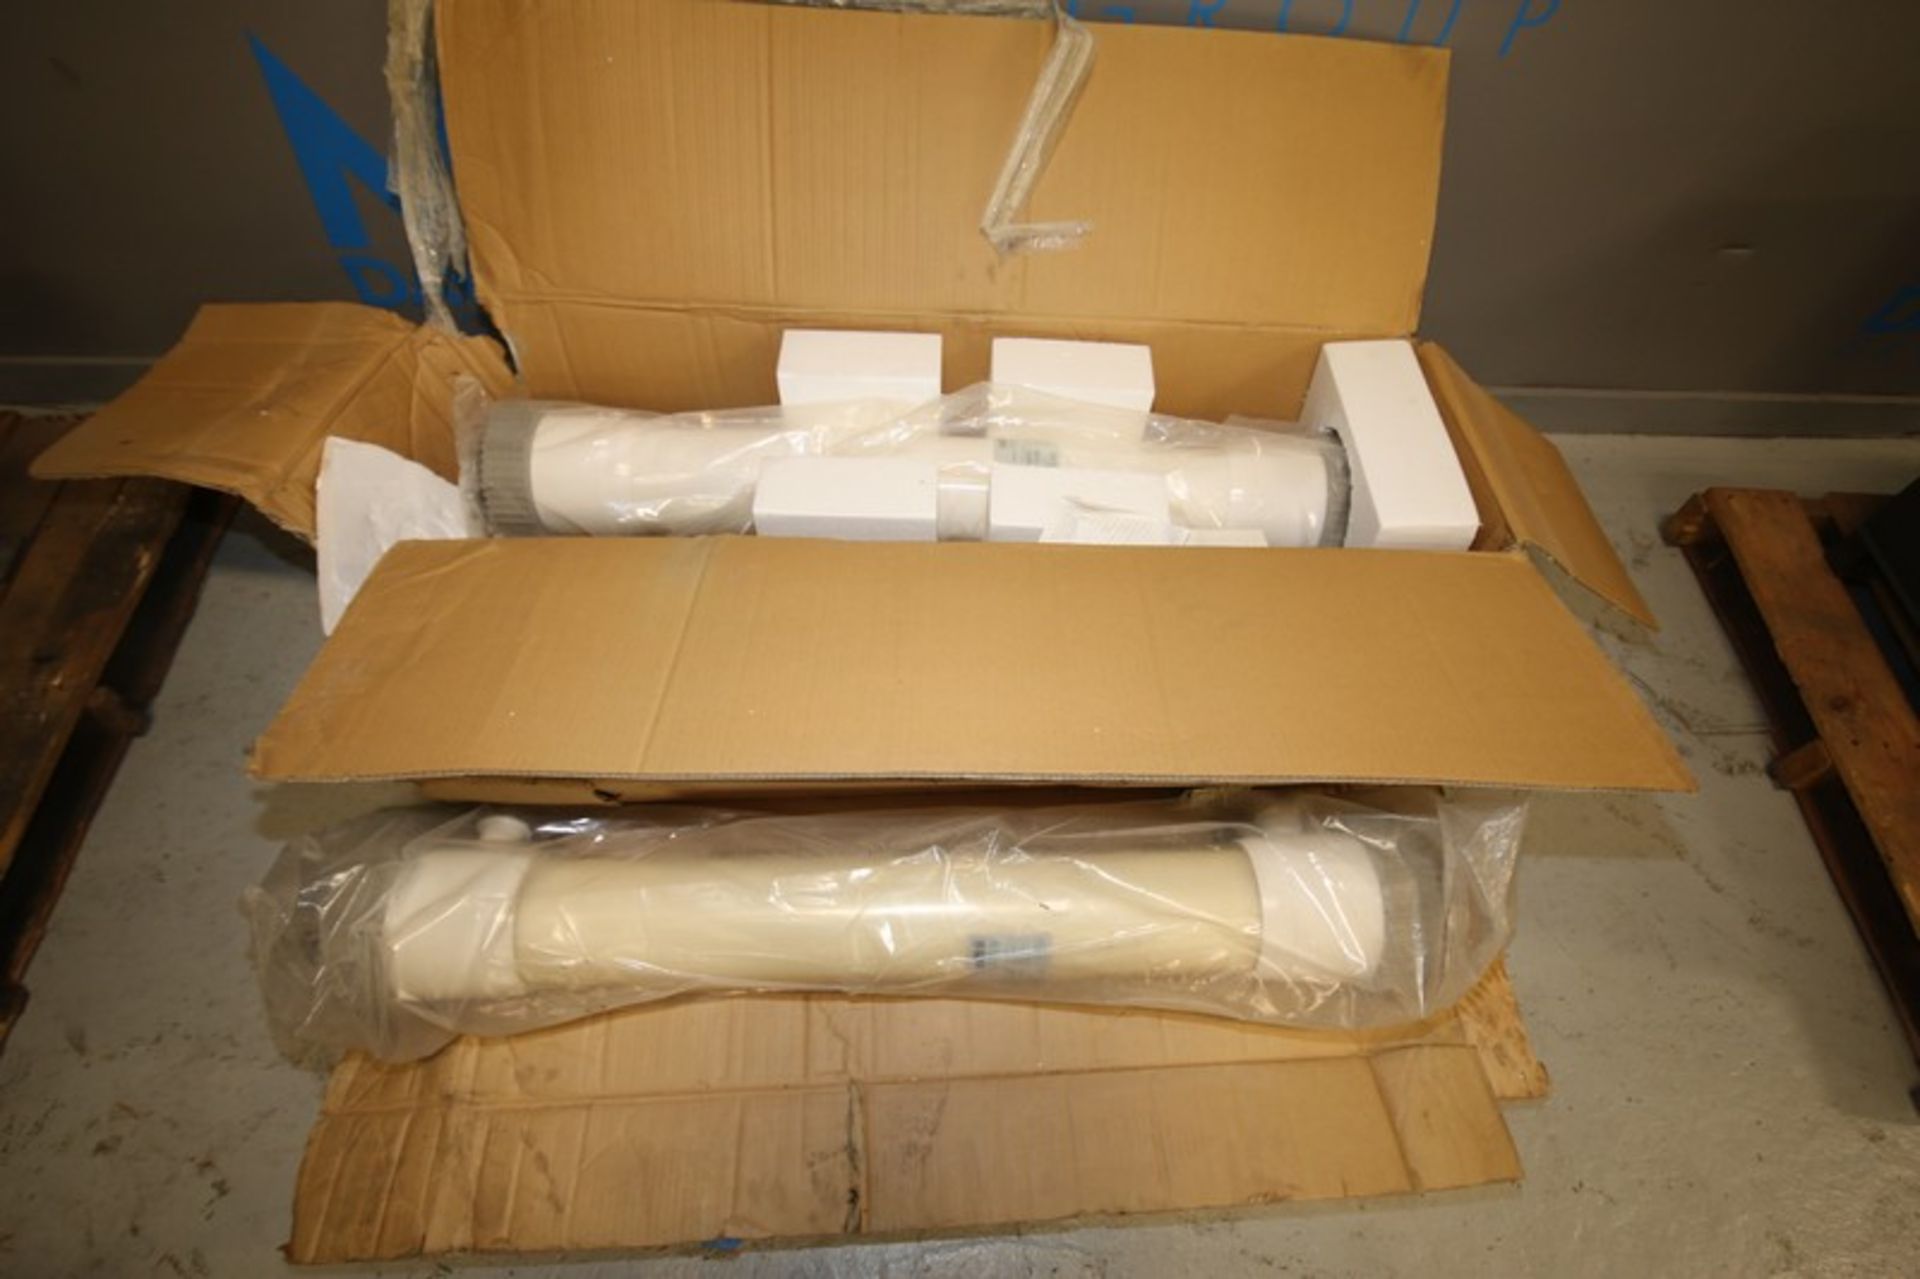 Lot of (2) Pall Microza Membranes, Part No. UMW-553 & WSP-543, 44" L with 3.5" Clamp Type Connection